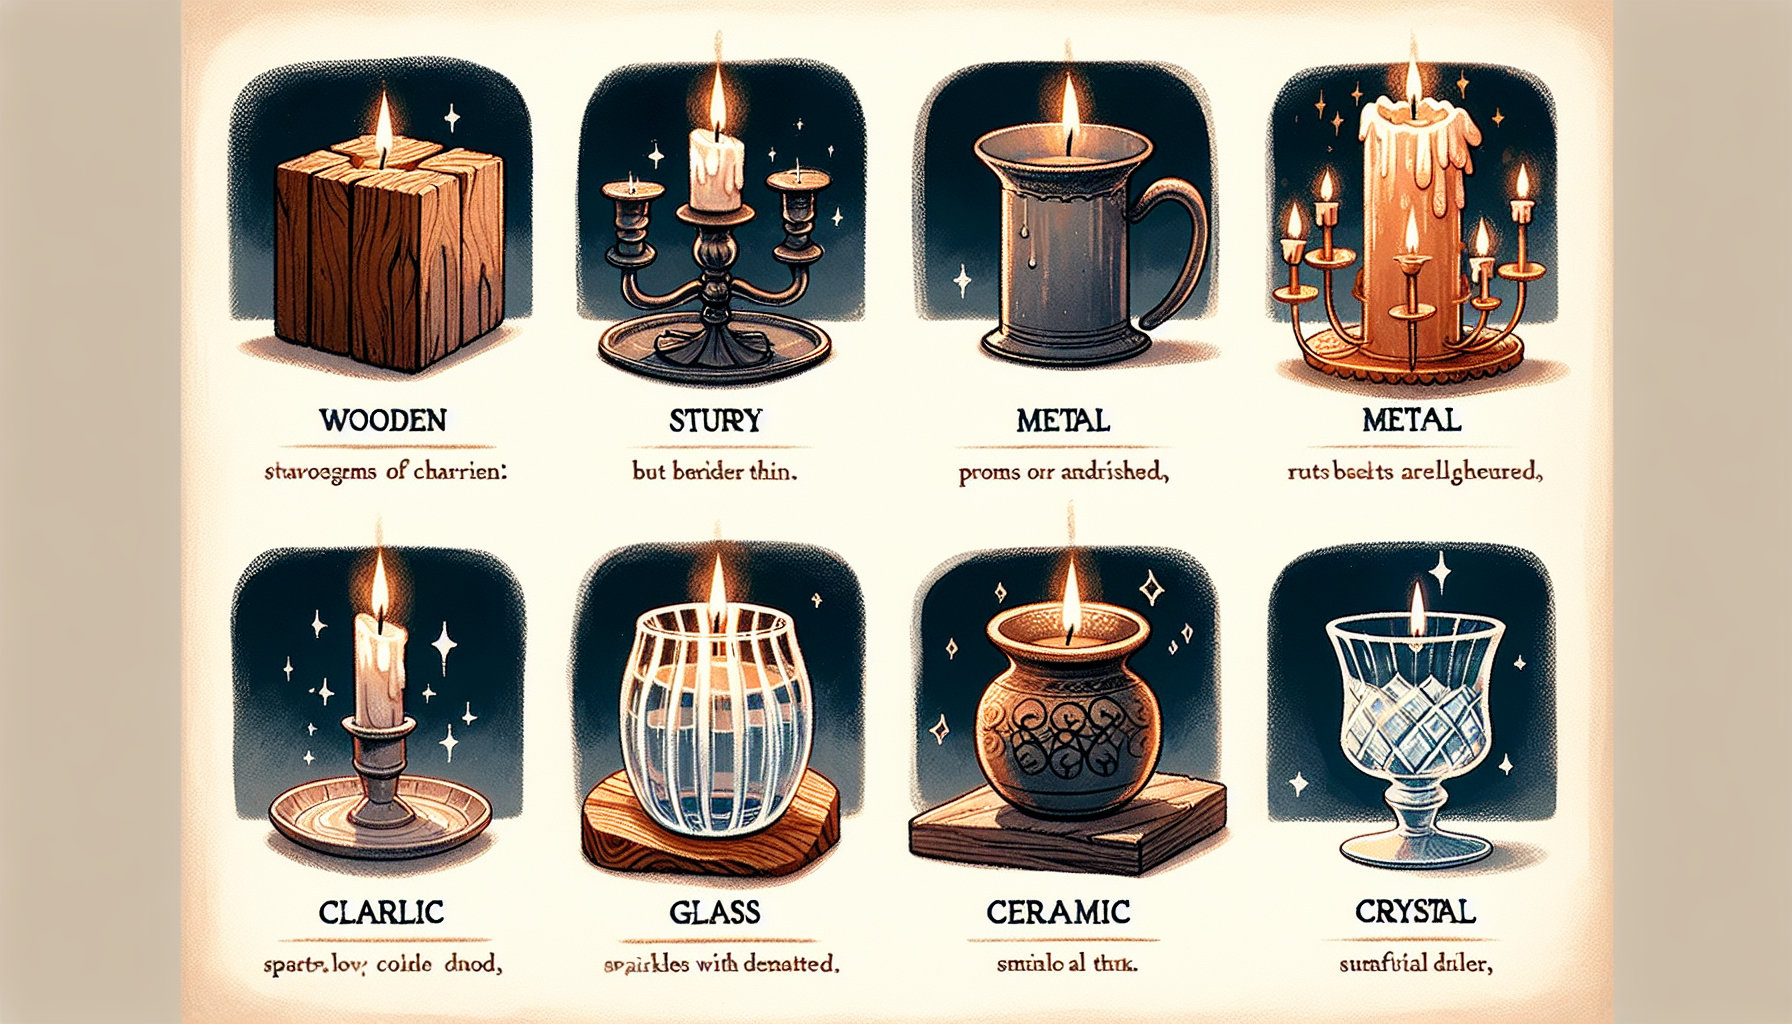 Illustration comparing different materials for candle holders